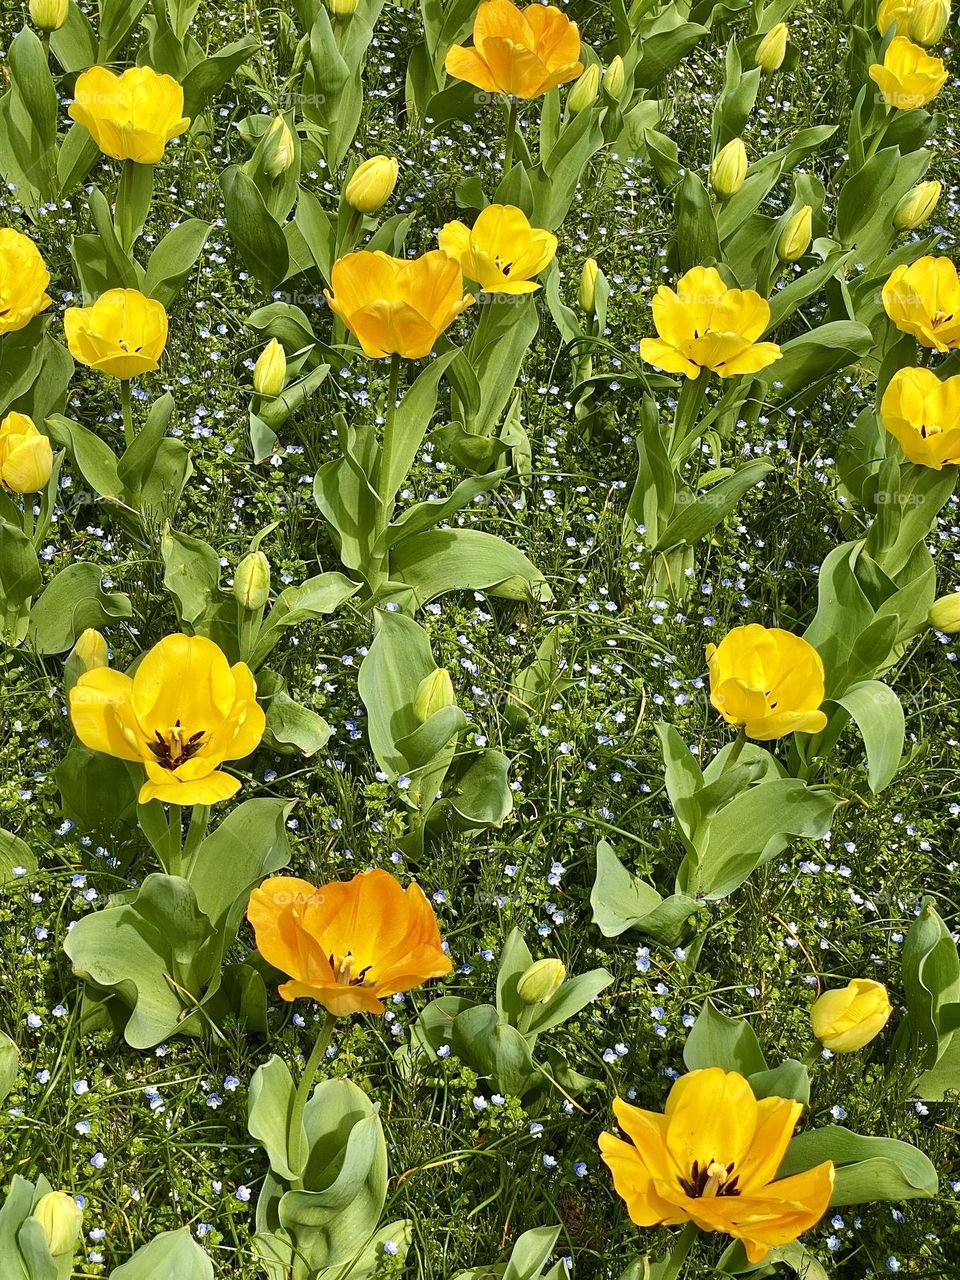 Yellow and orange tulips surrounded by small blue wildflowers